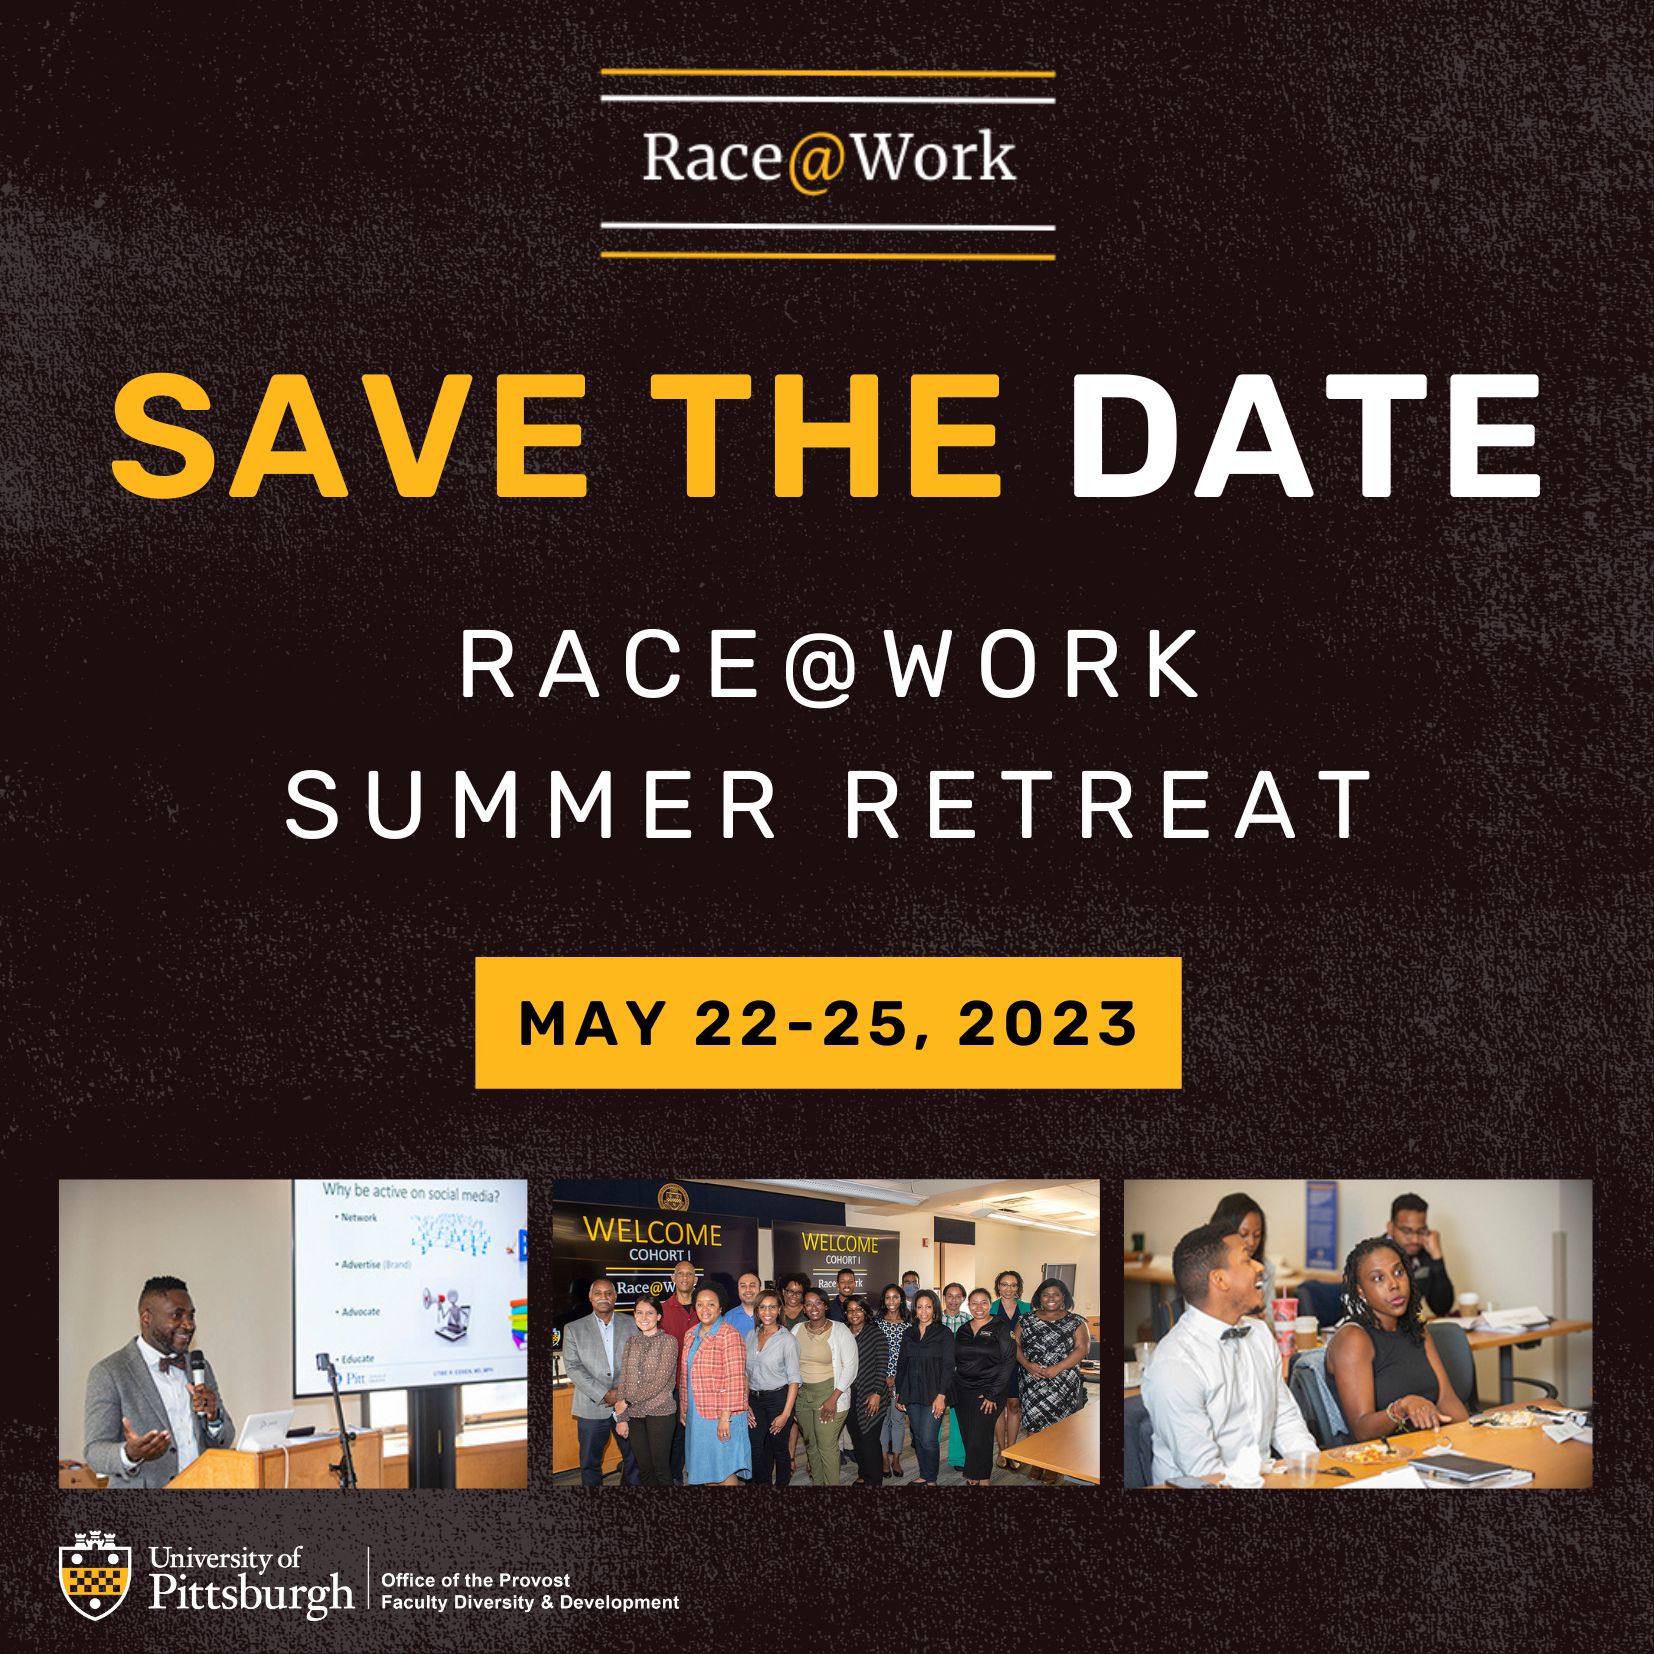 Race@Work Summer Retreat Save the Date May 22-25, 2023